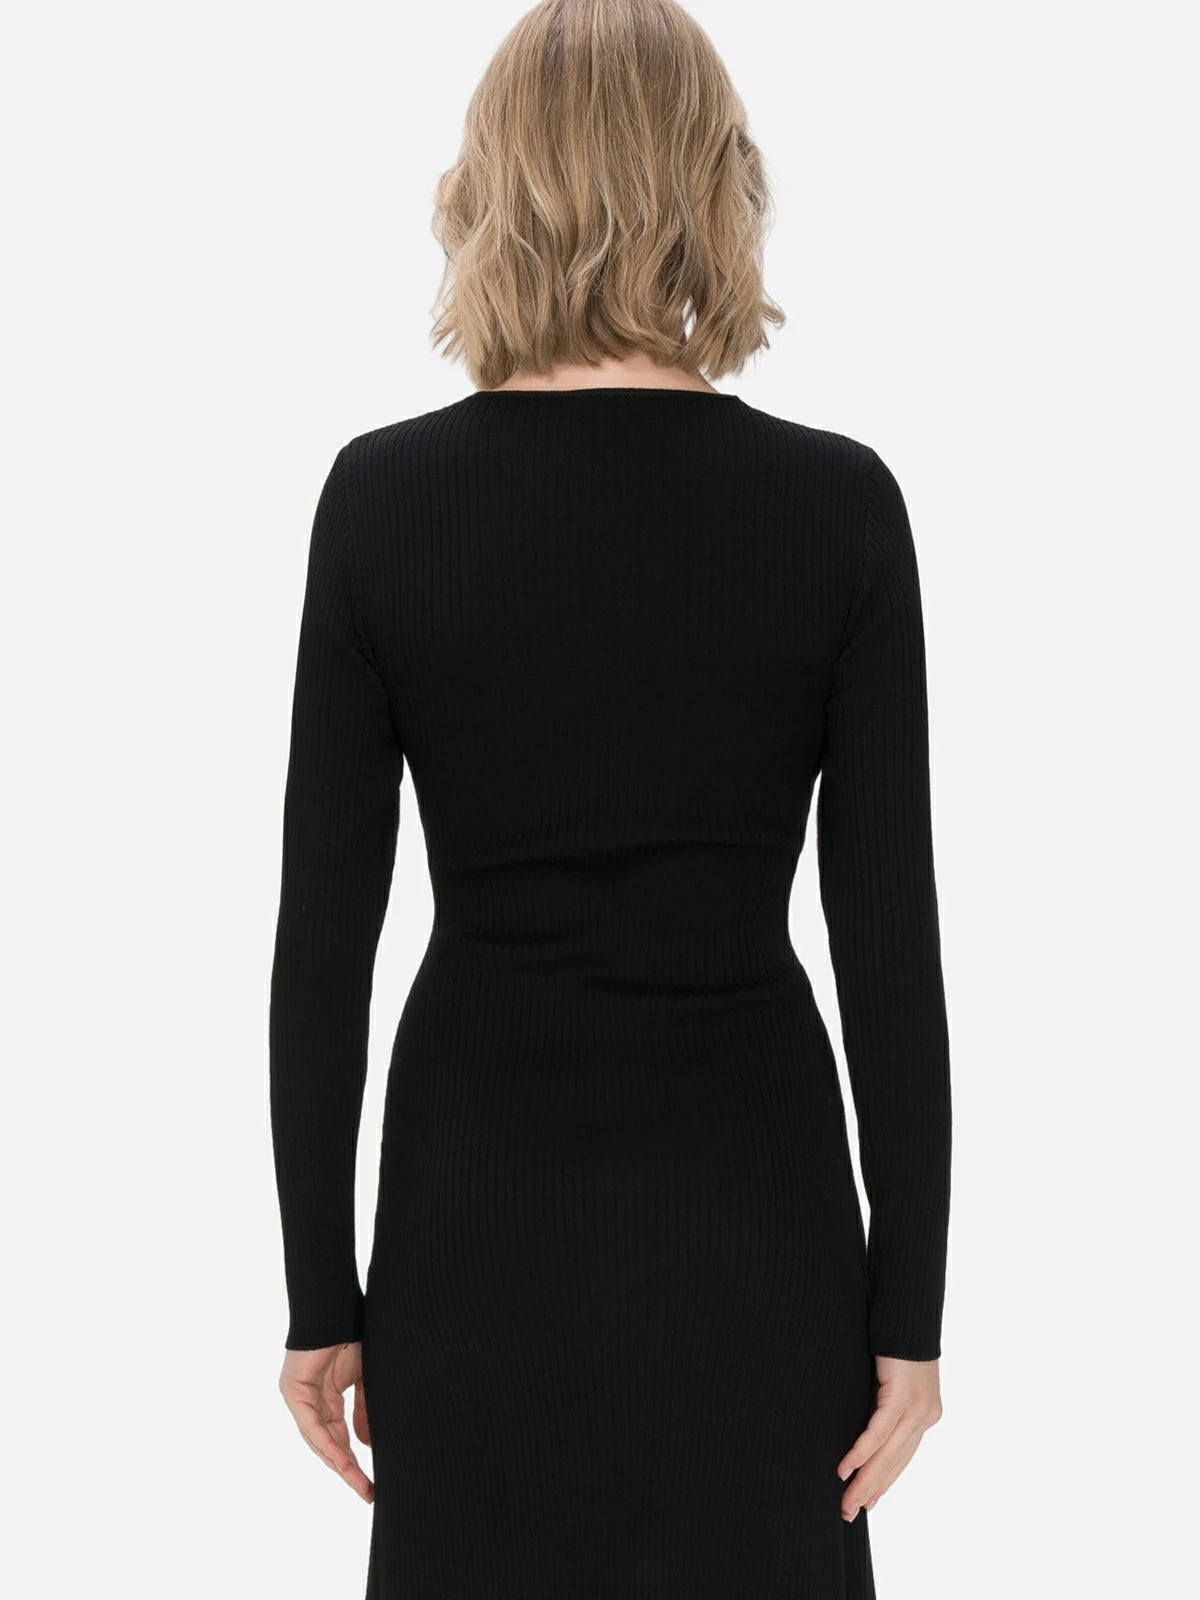 Discover the perfect fusion of fashion and elegance in this black knit midi dress featuring a cross V-neck design, versatile occasion wear.